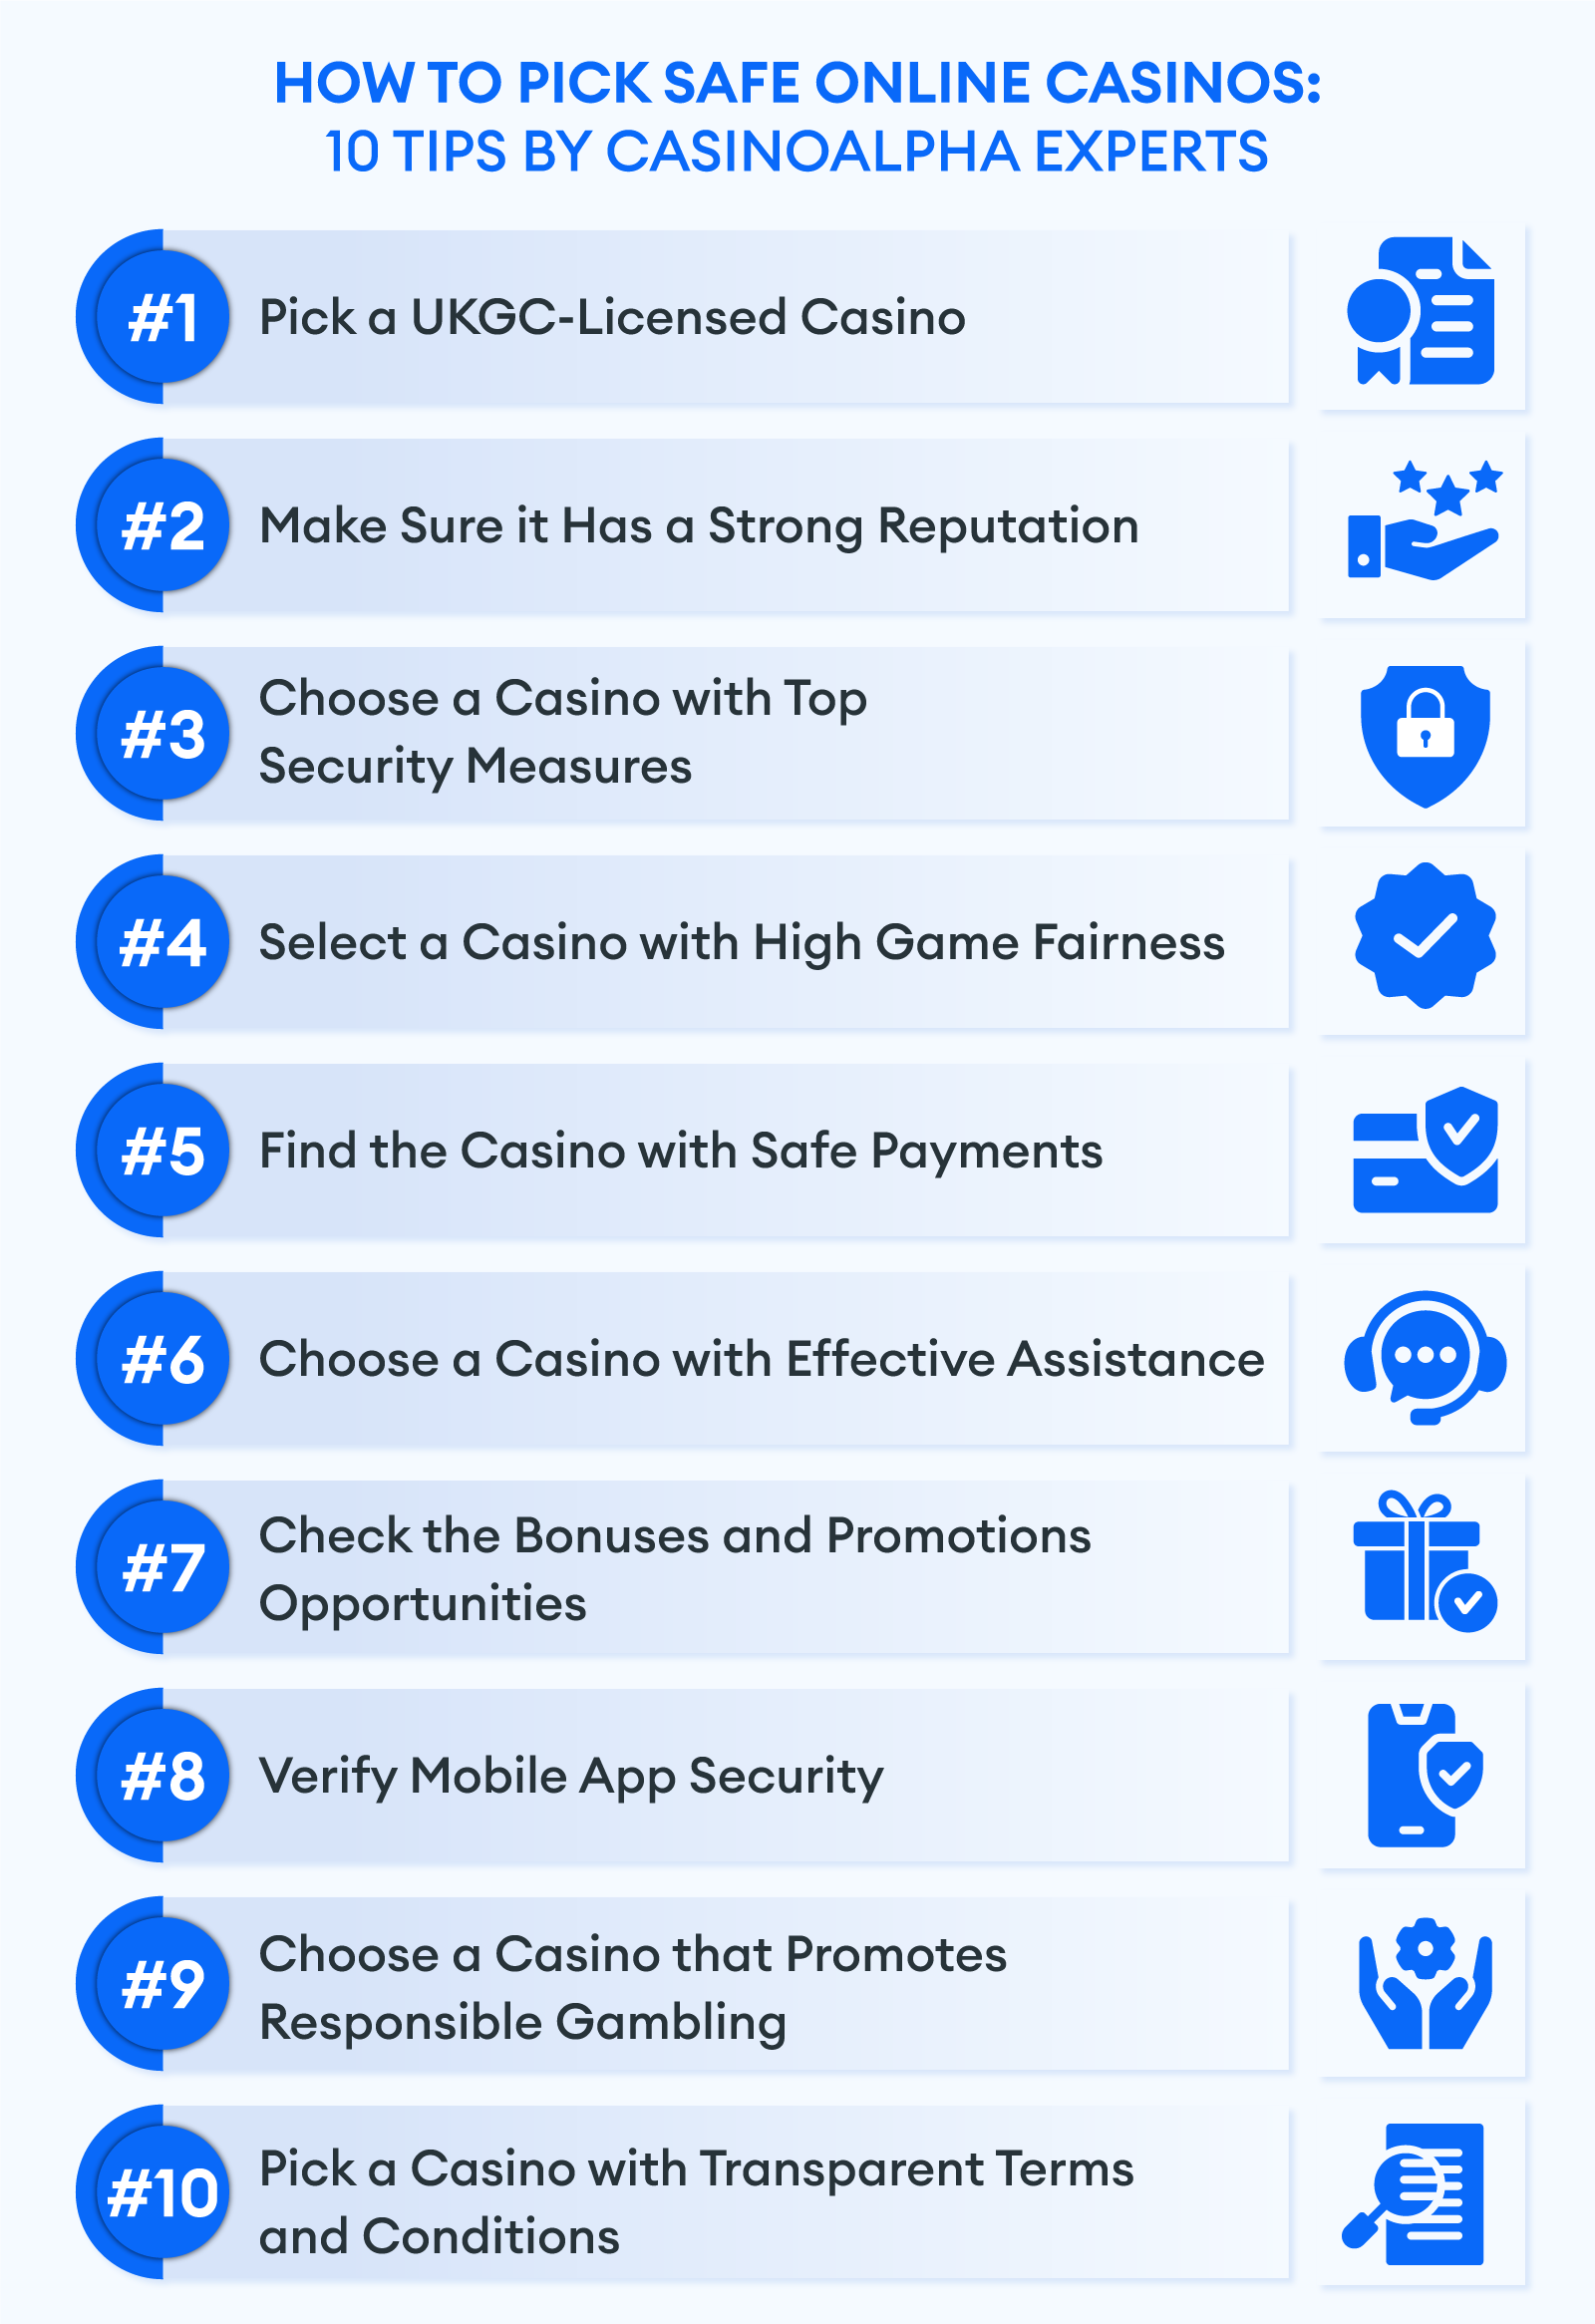 10 Tips by CasinoAlpha Experts about How to Pick a Safe Online Casino